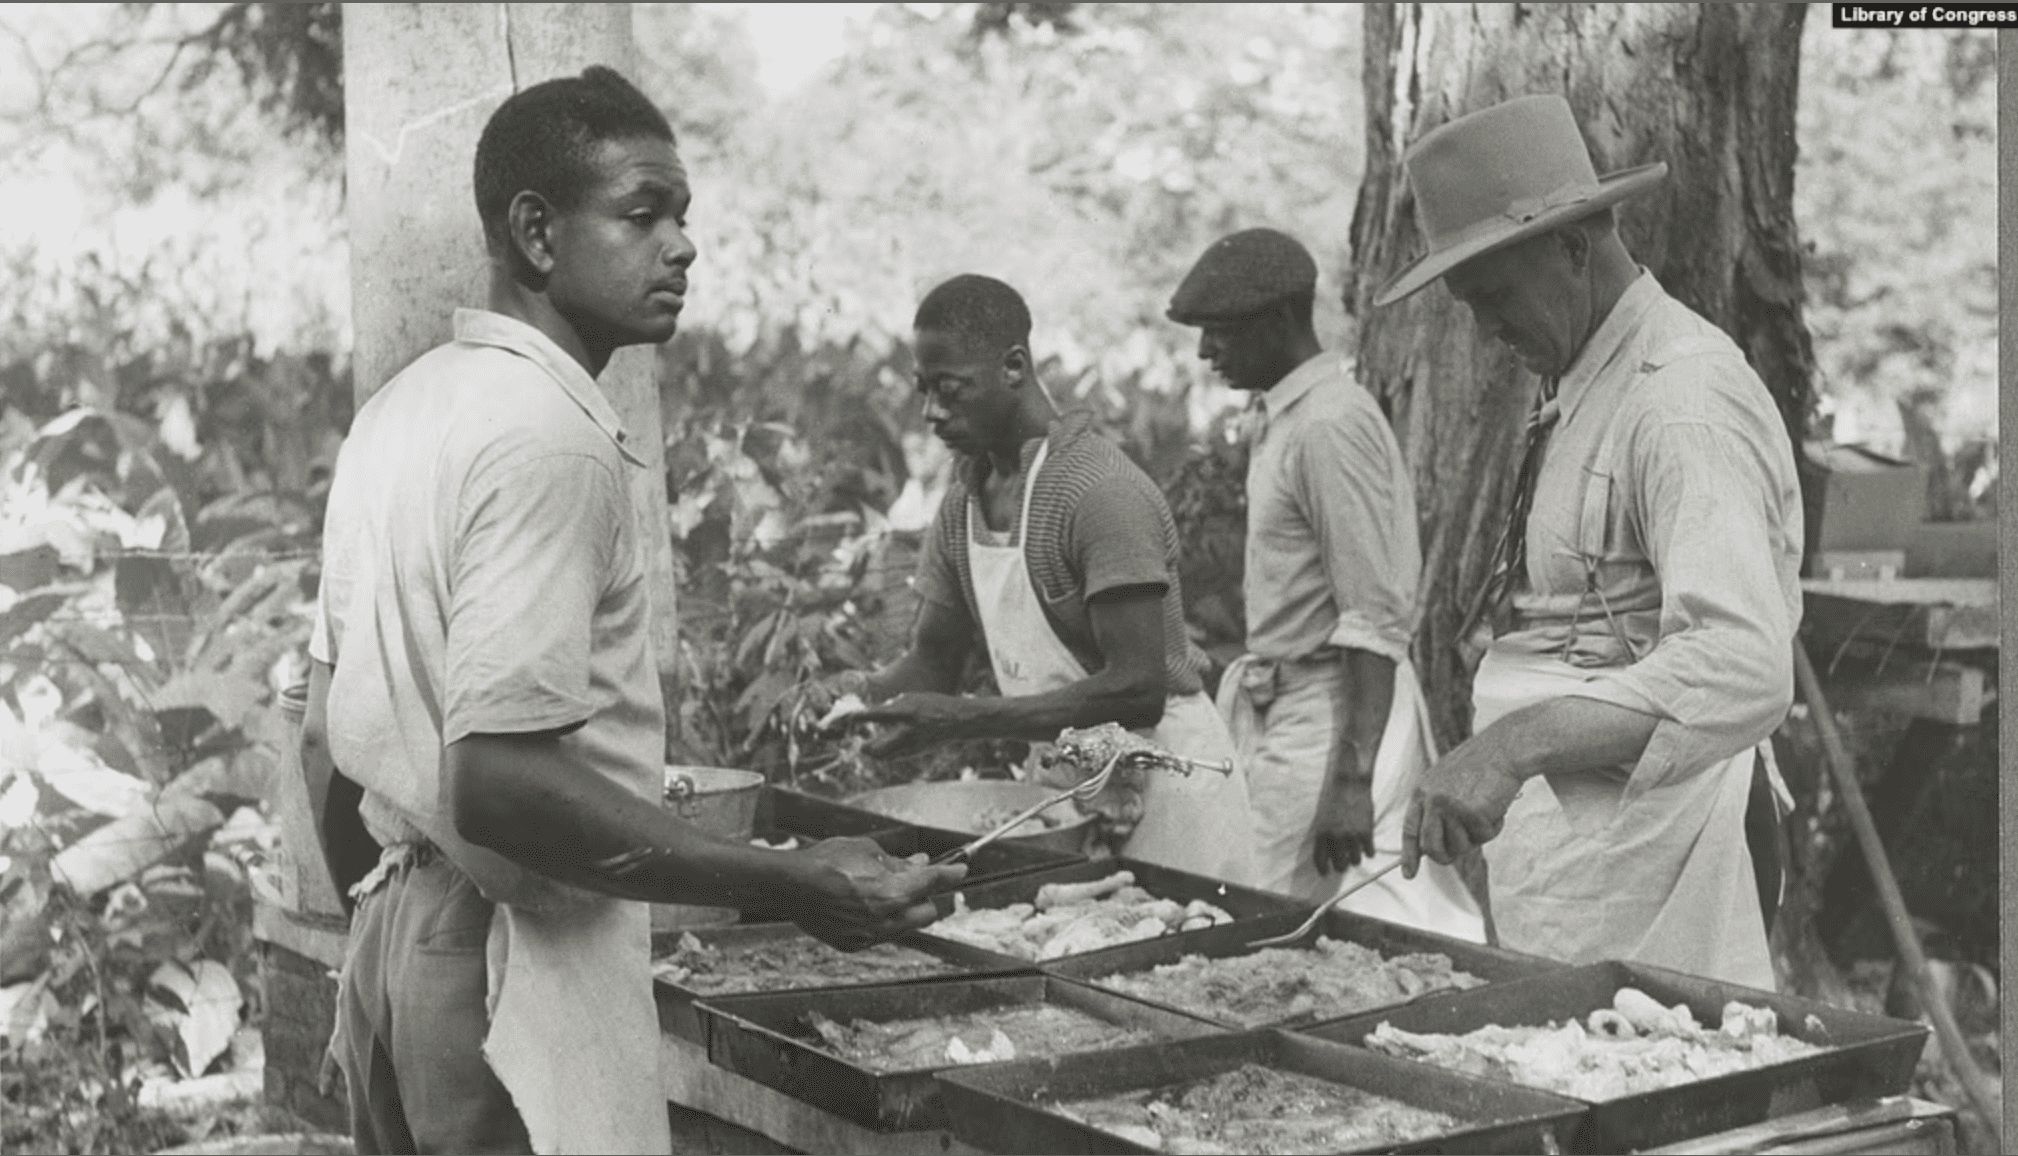 Three black men and a white man cooking outdoors